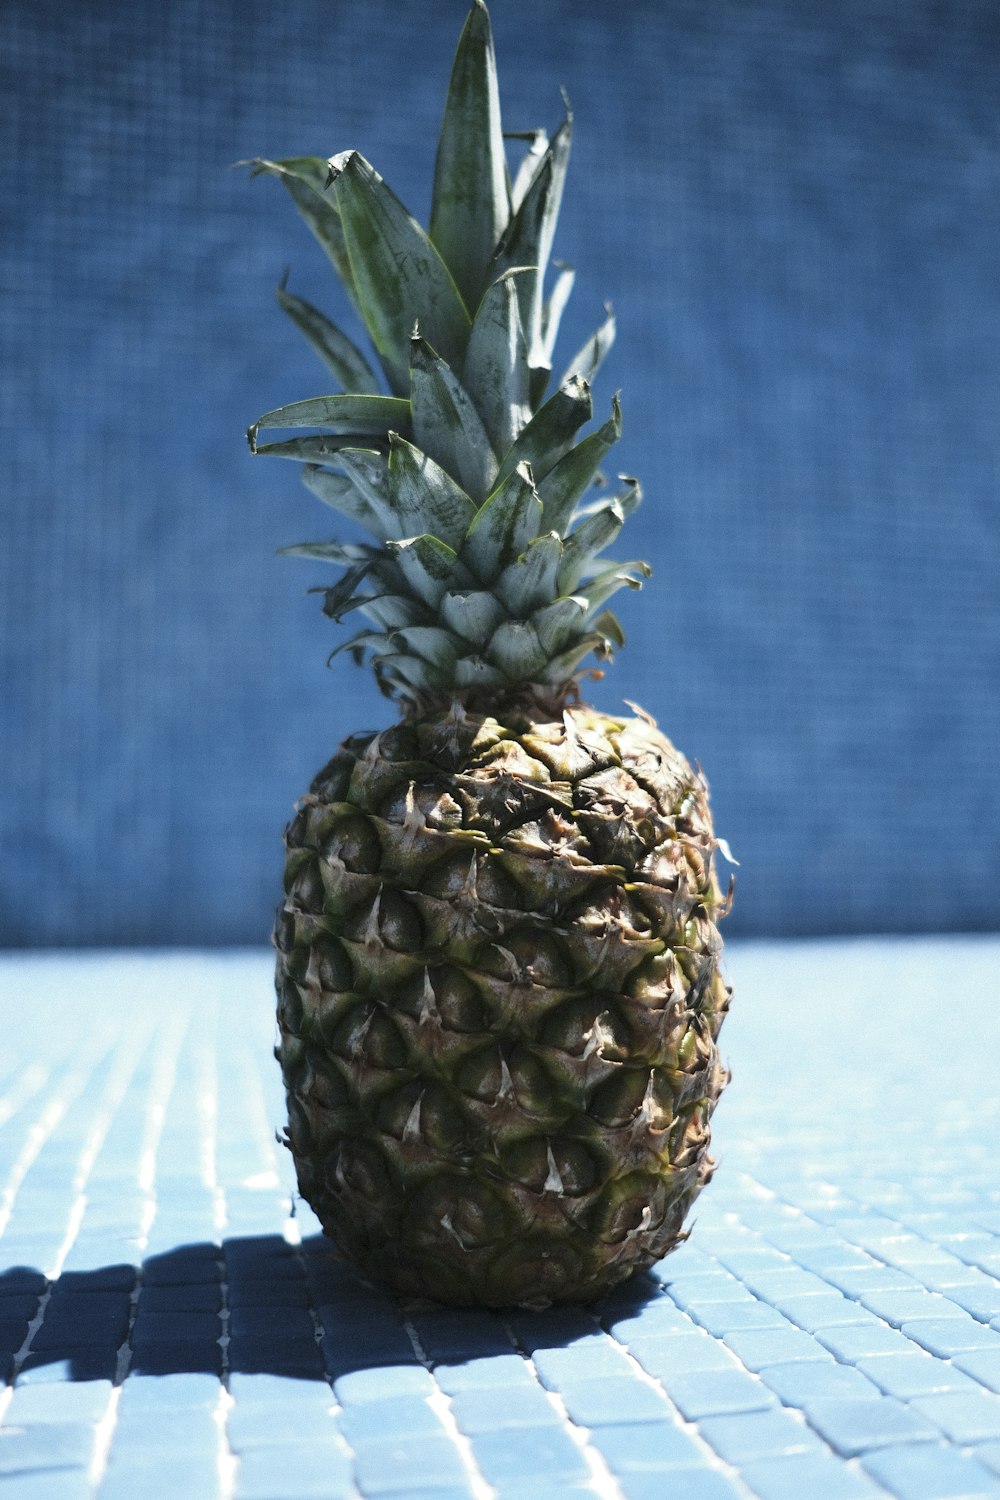 ananas fruit sur table blanche